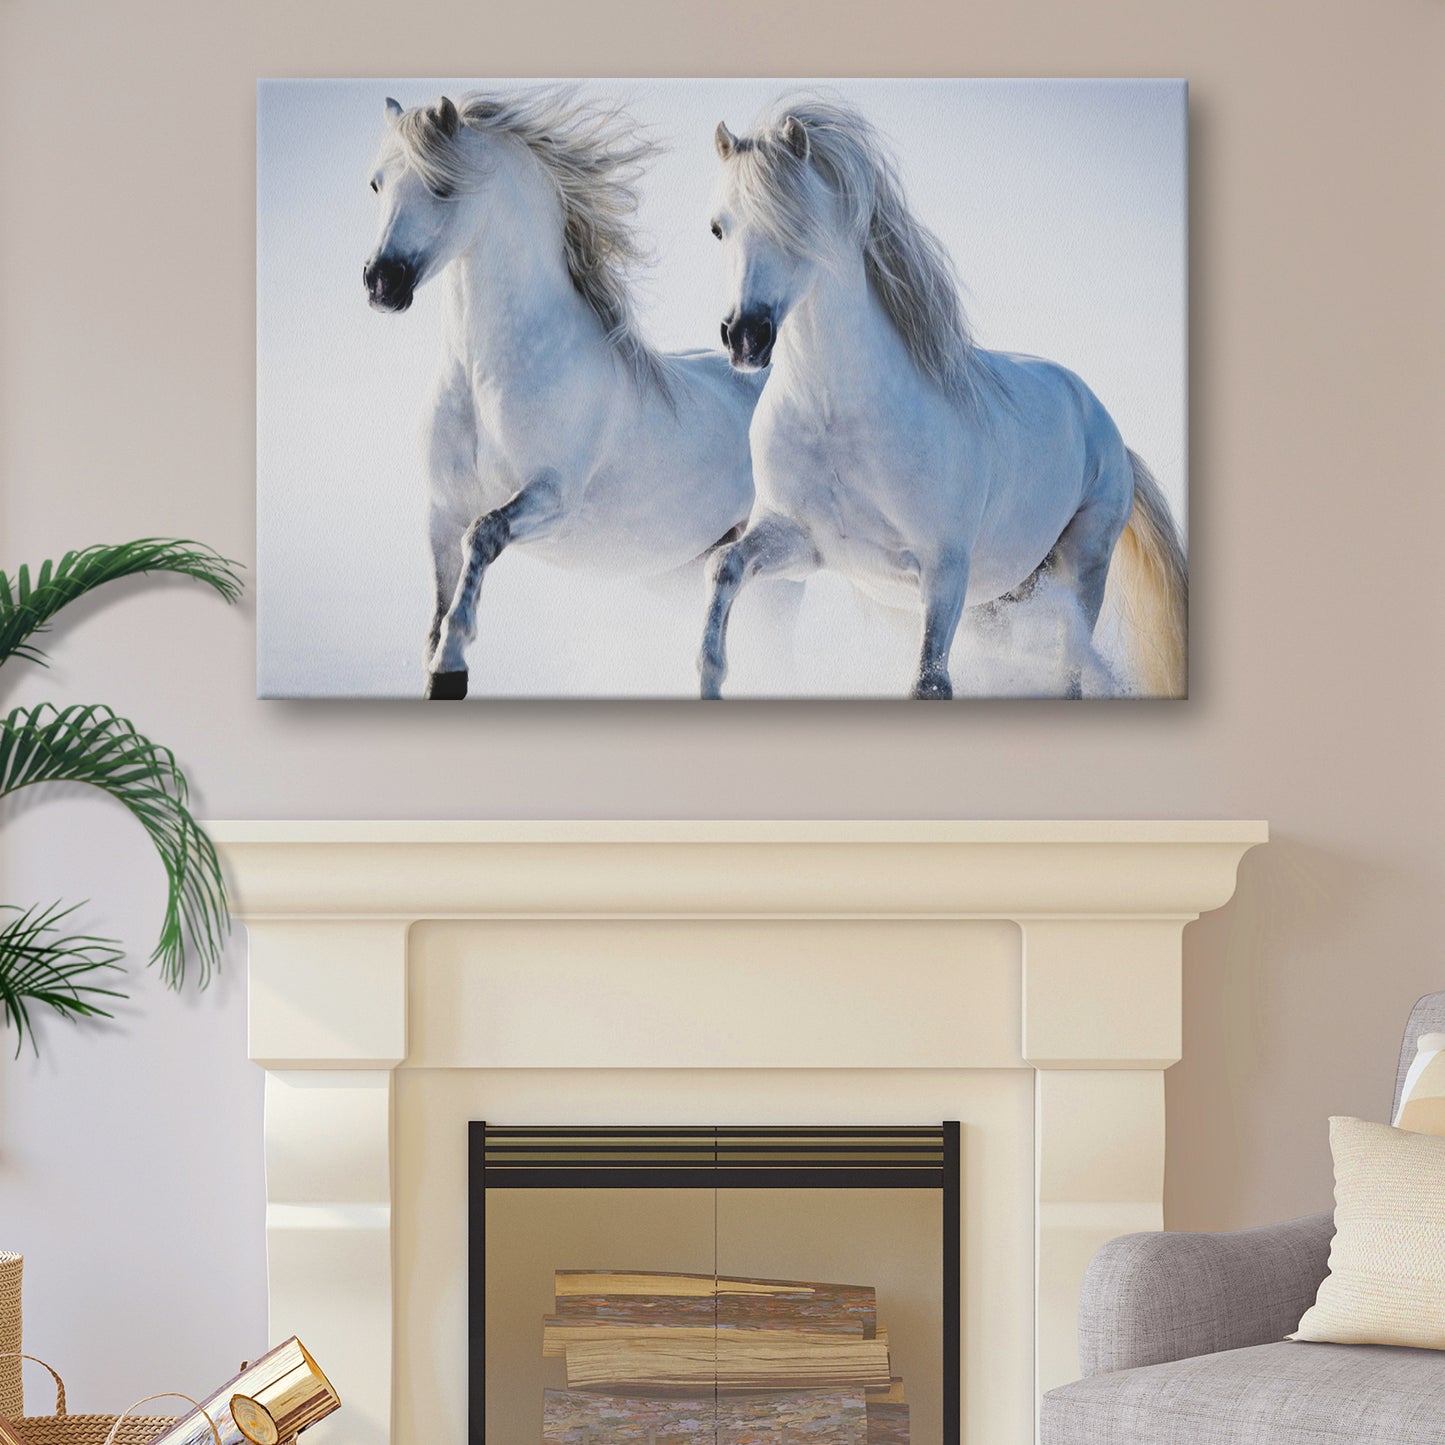 White Horse Couple Canvas Wall Art - Image by Tailored Canvases